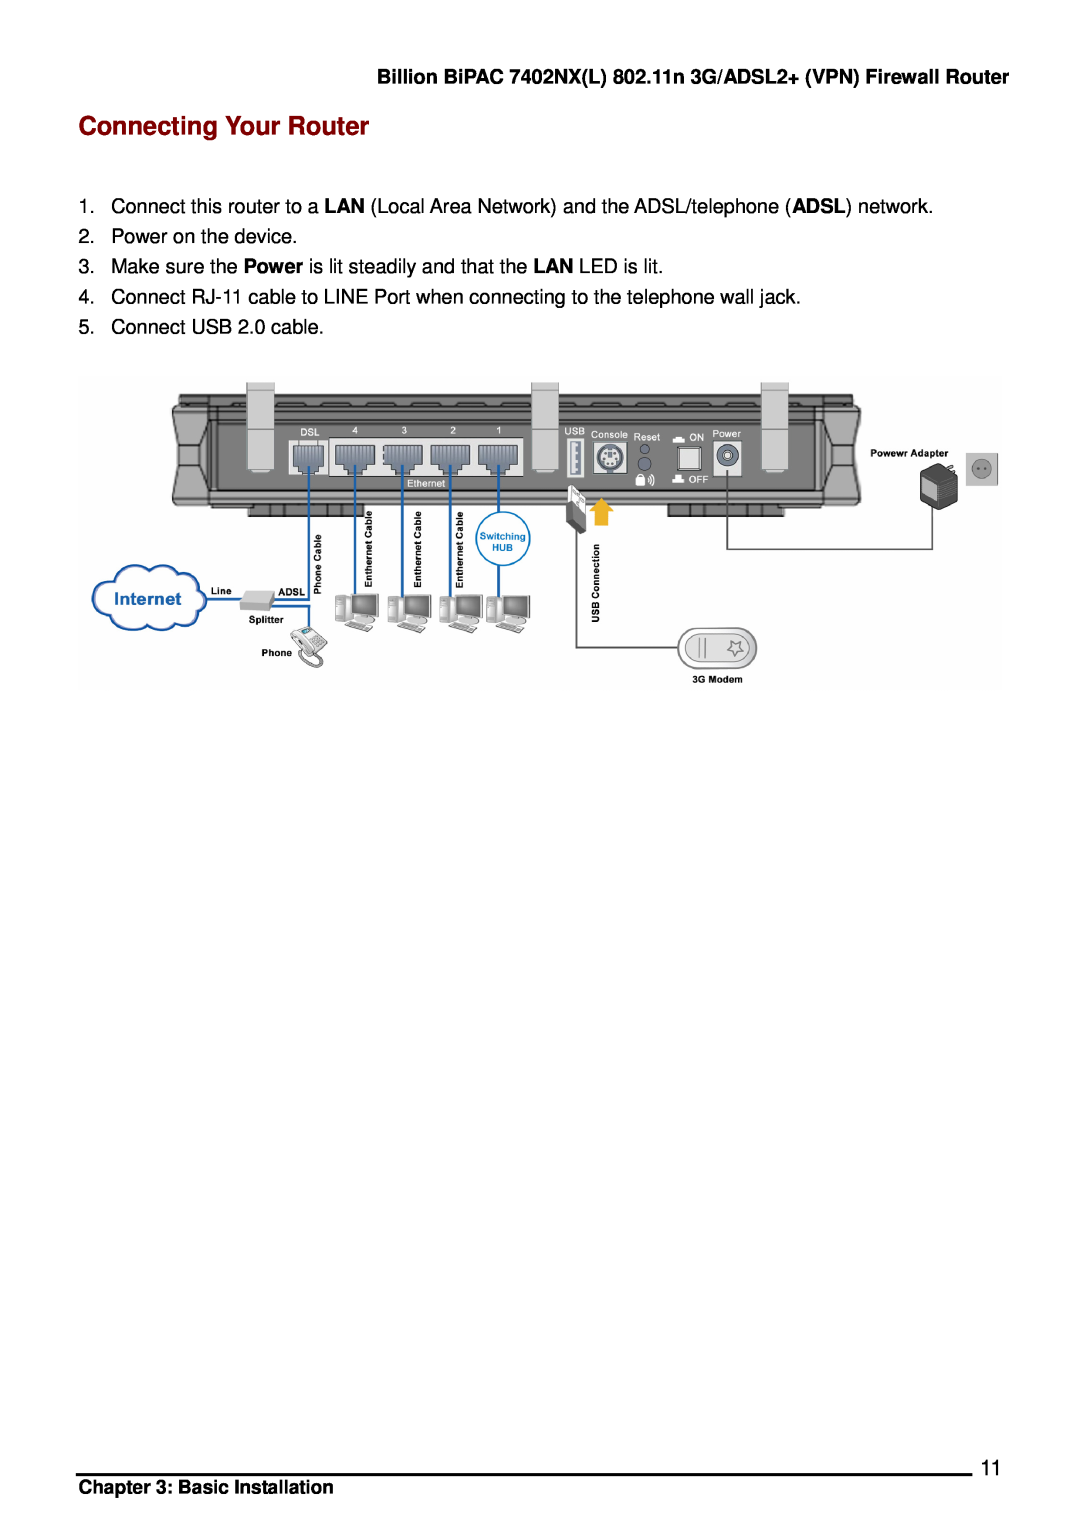 Billion Electric Company user manual Connecting Your Router, Billion BiPAC 7402NXL 802.11n 3G/ADSL2+ VPN Firewall Router 